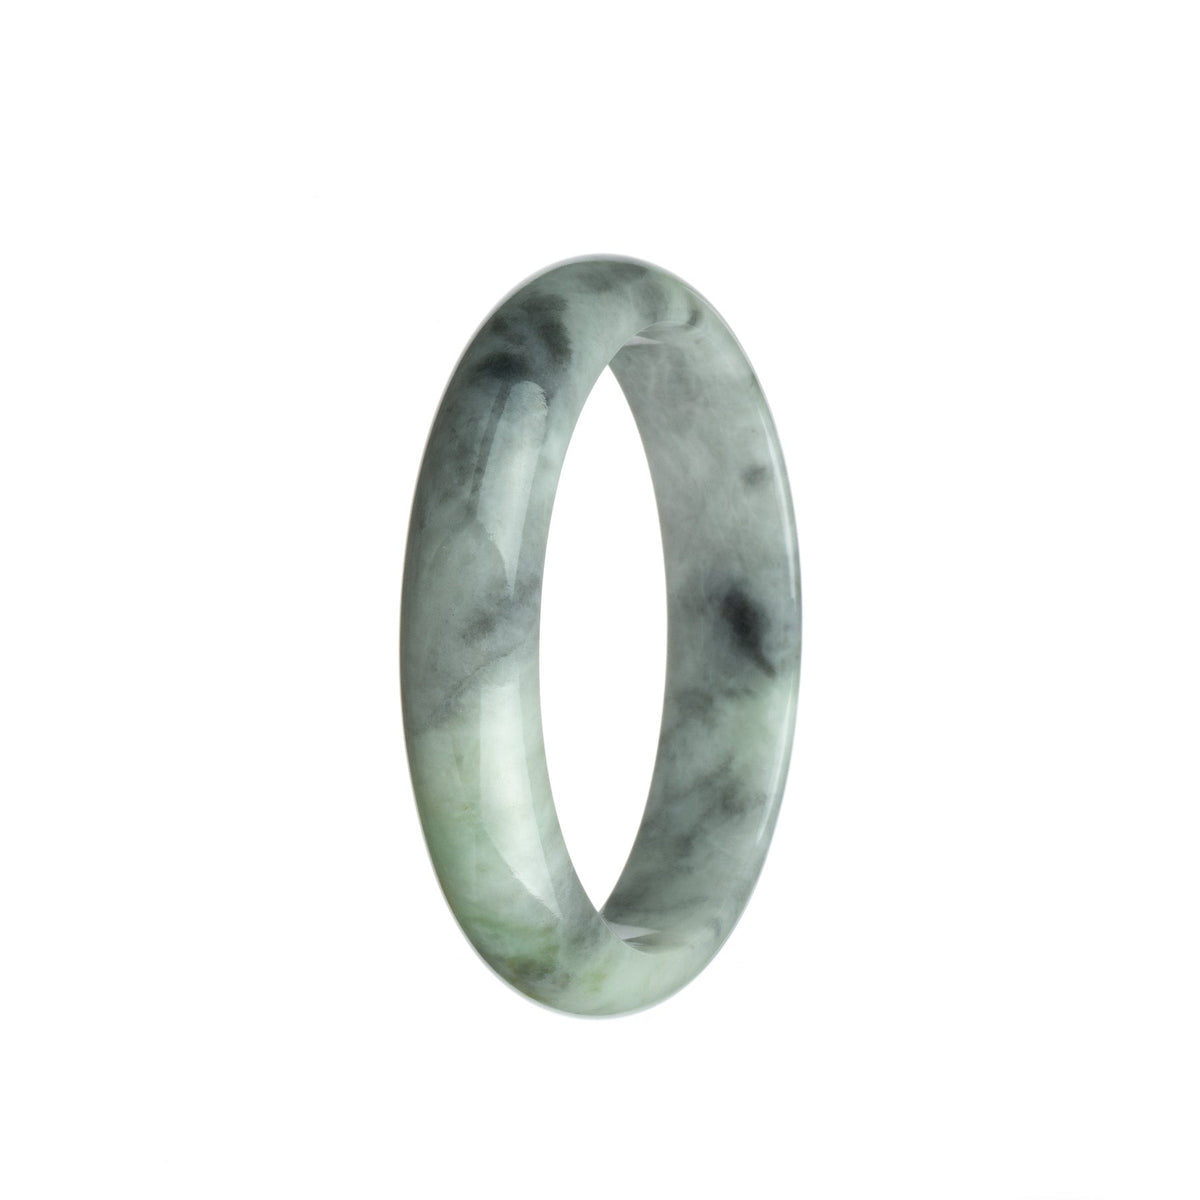 A close-up photo of a stunning grey-green patterned Burmese jade bracelet. The bracelet is in the shape of a half moon and measures 58mm in size. It exudes an authentic and high-quality vibe.